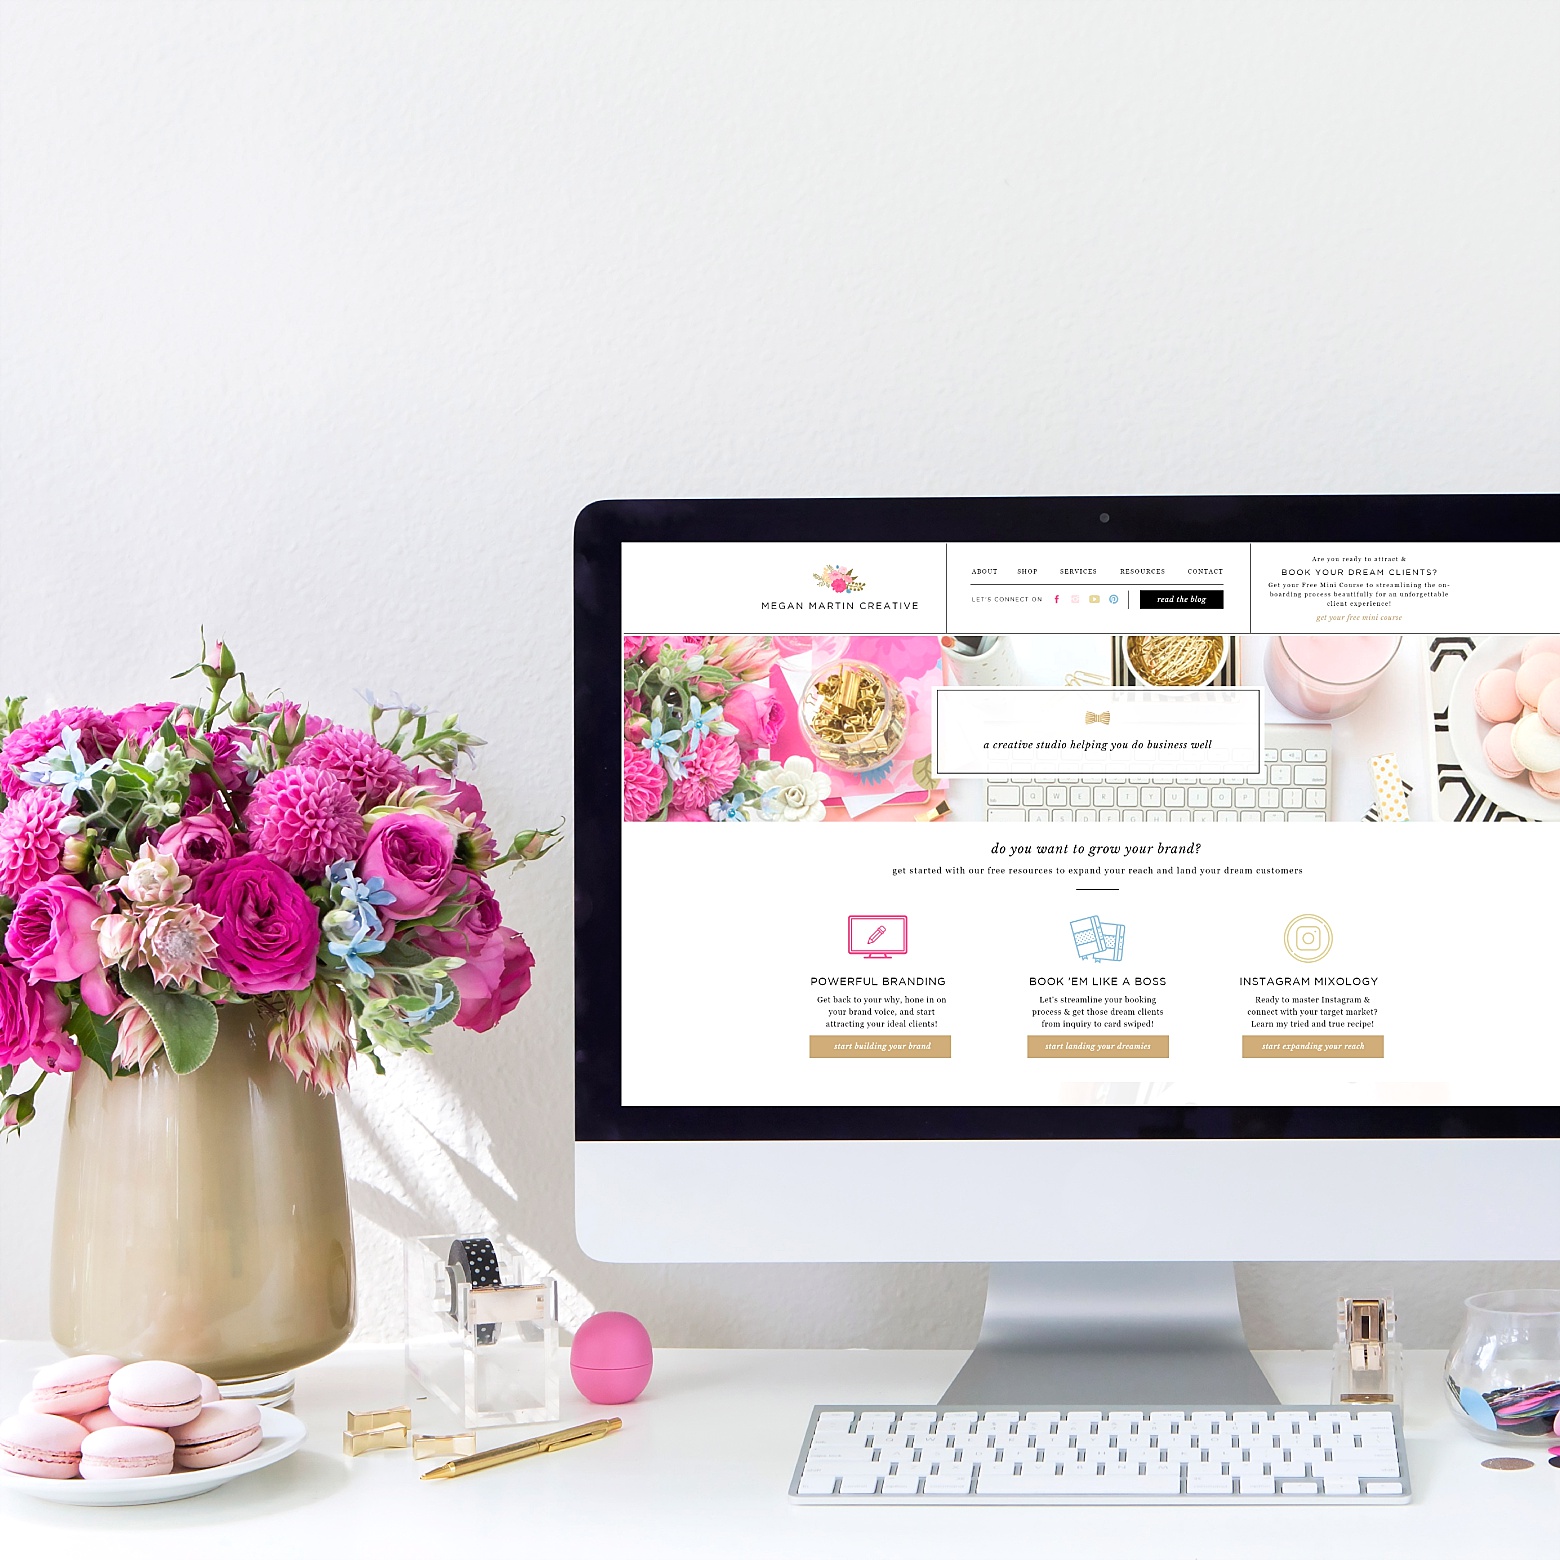 Showit 5 website design, How to organize and complete your new website design on Megan Martin Creative, DIY website, creative website, branding, brand